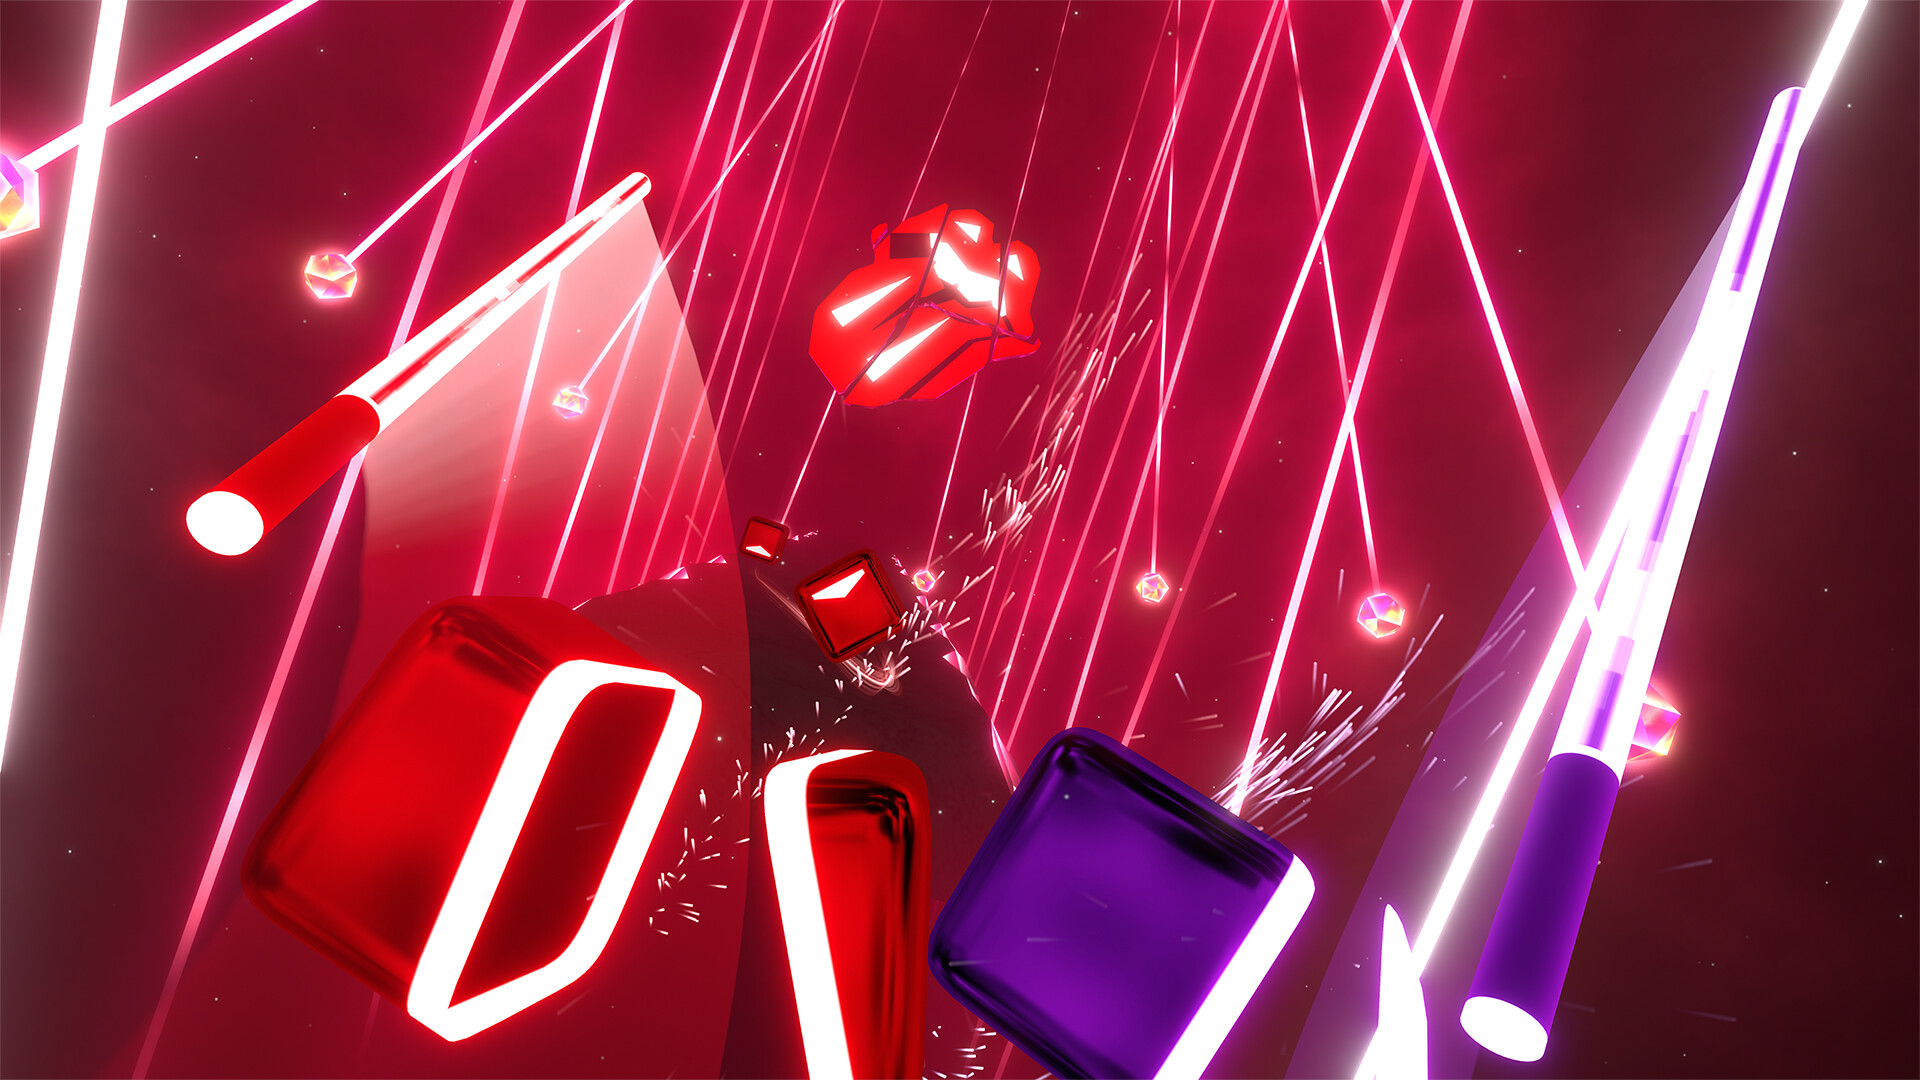 Beat Saber - The Rolling Stones - "Can’t You Hear Me Knocking" Featured Screenshot #1